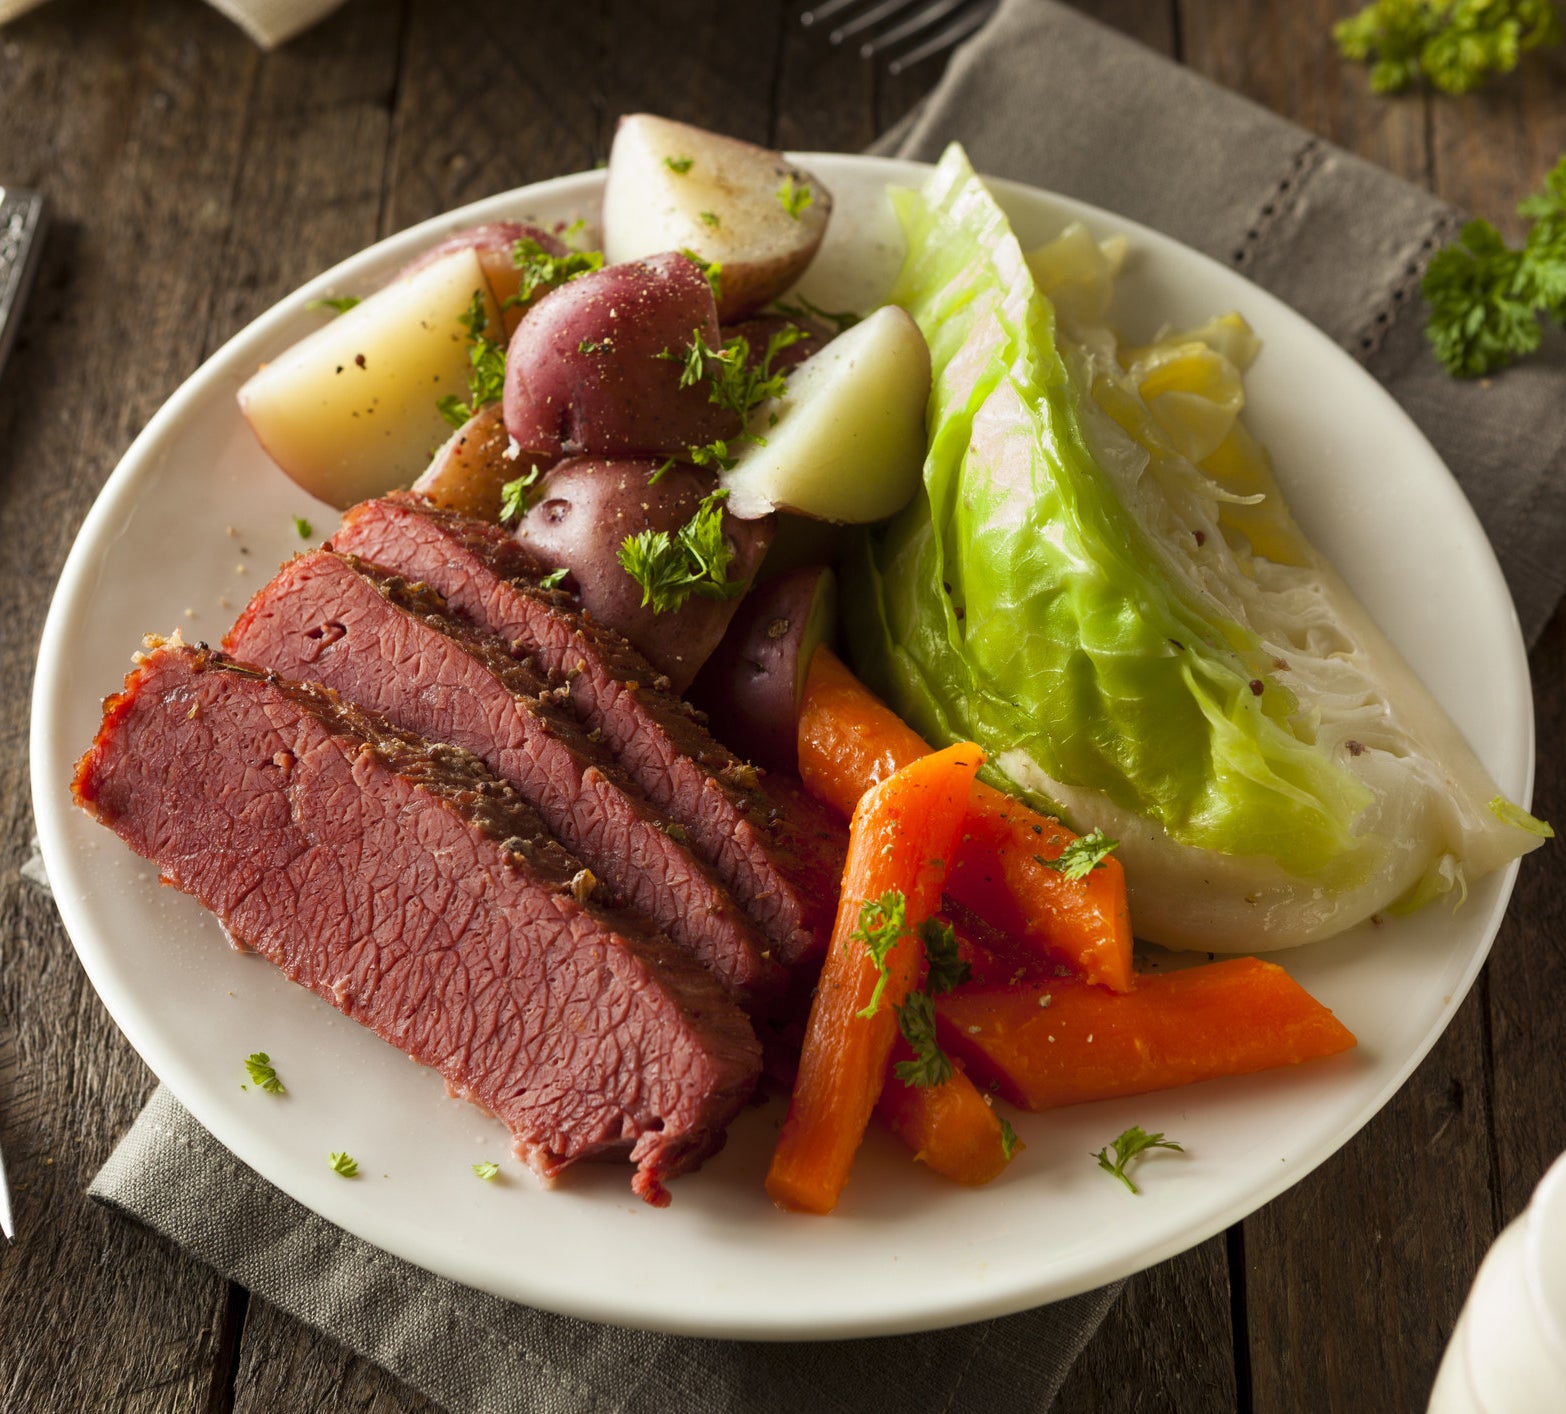 A plate of corned beef, cabbage, and potatoes.